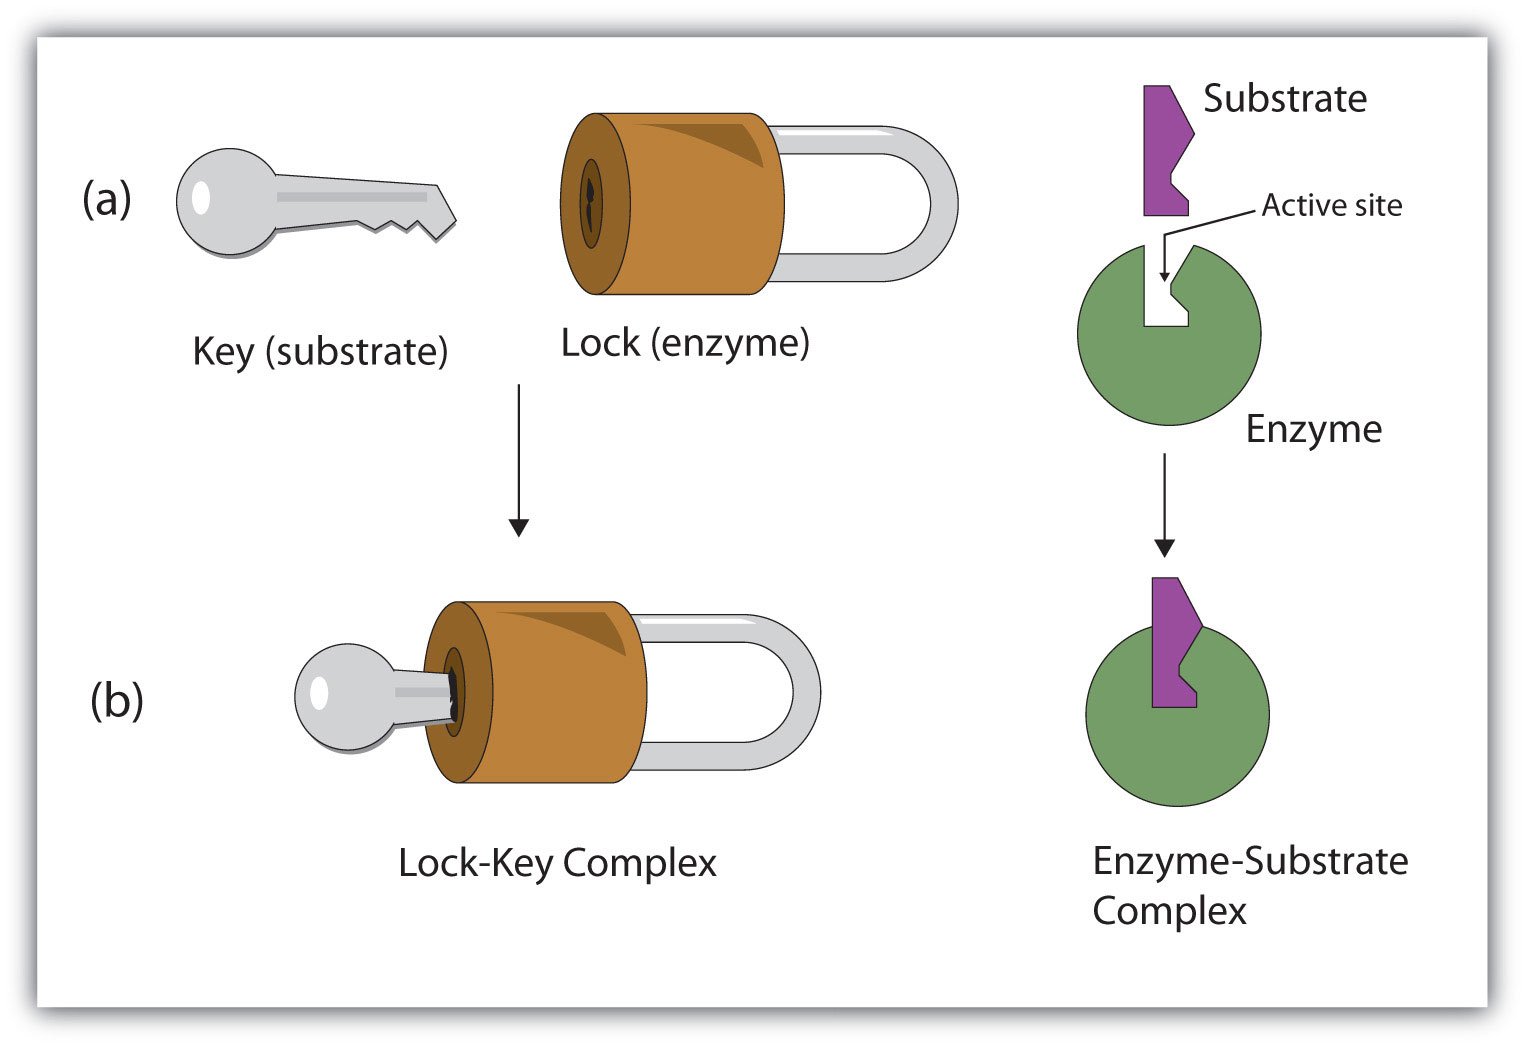 The Substrate-Enzyme Binding